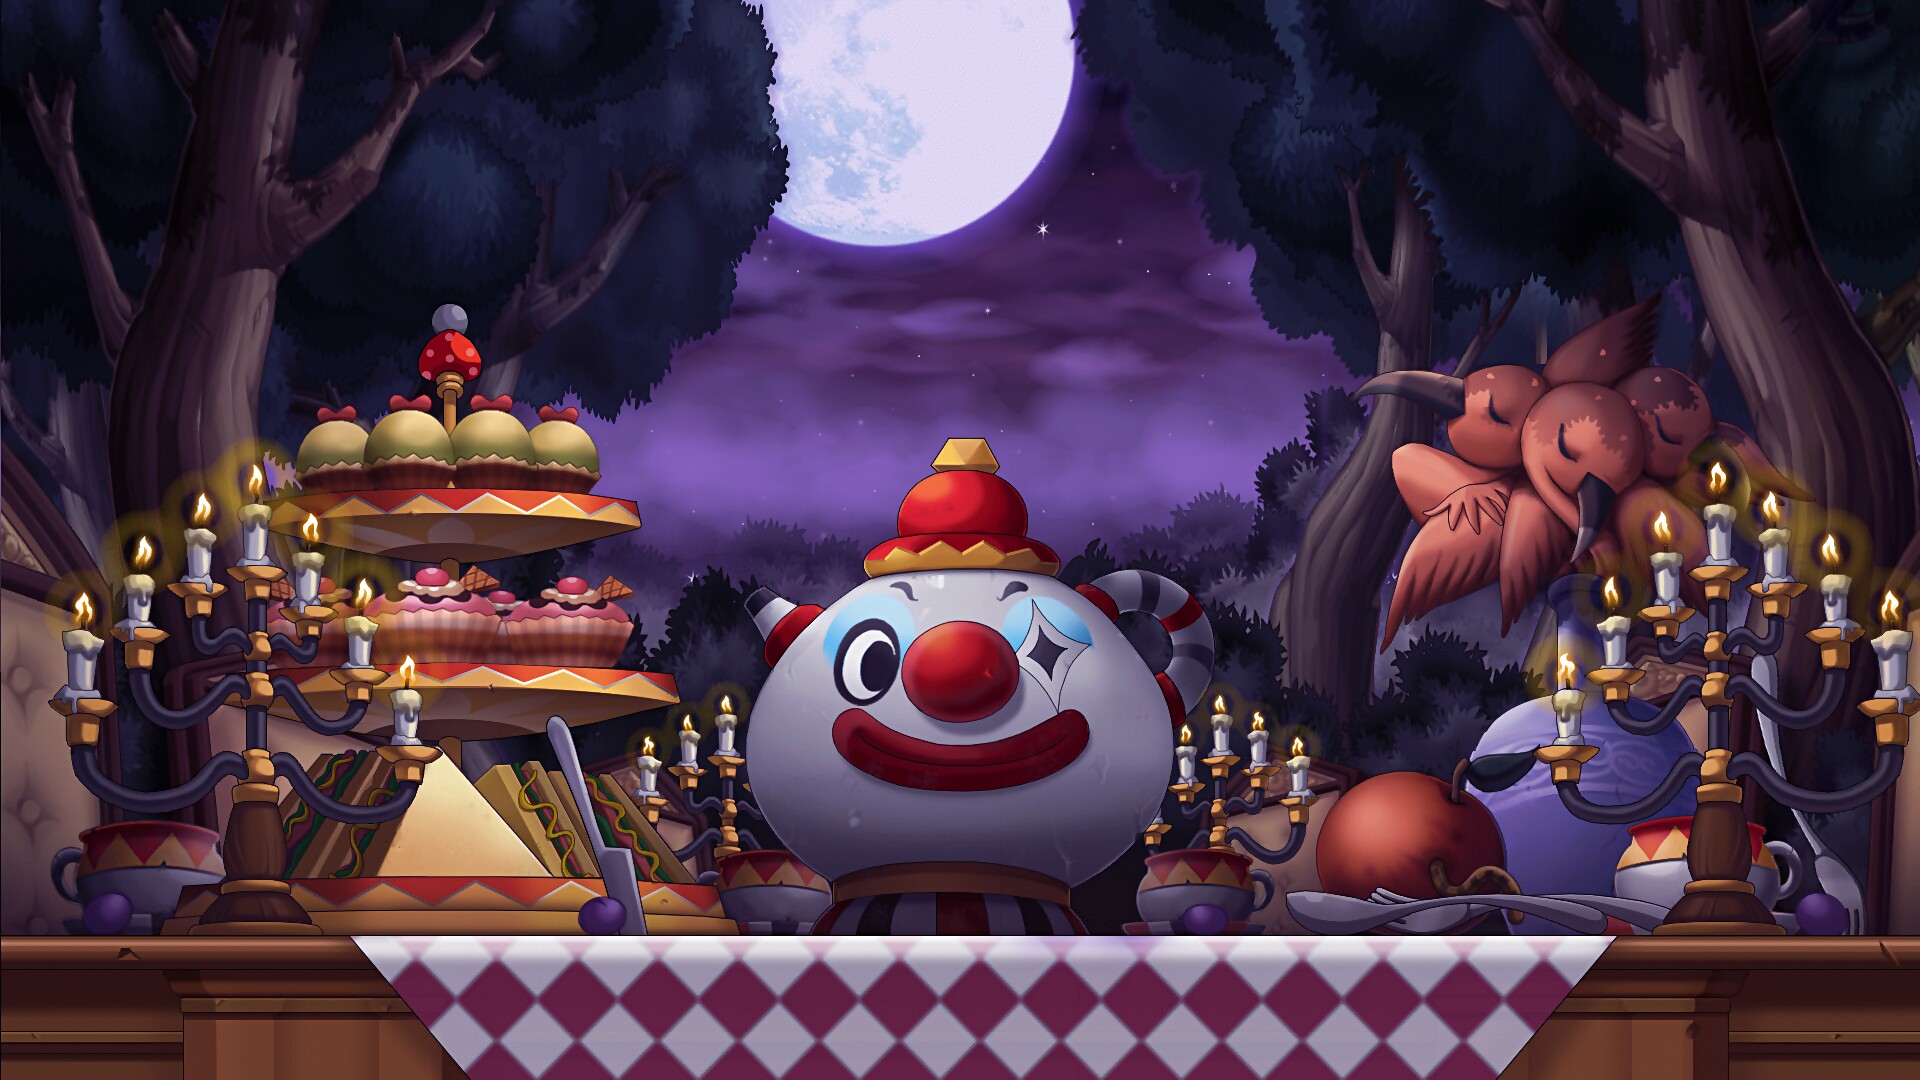 General 1920x1080 MapleStory video games video game art artwork sweets Moon night candles teapot